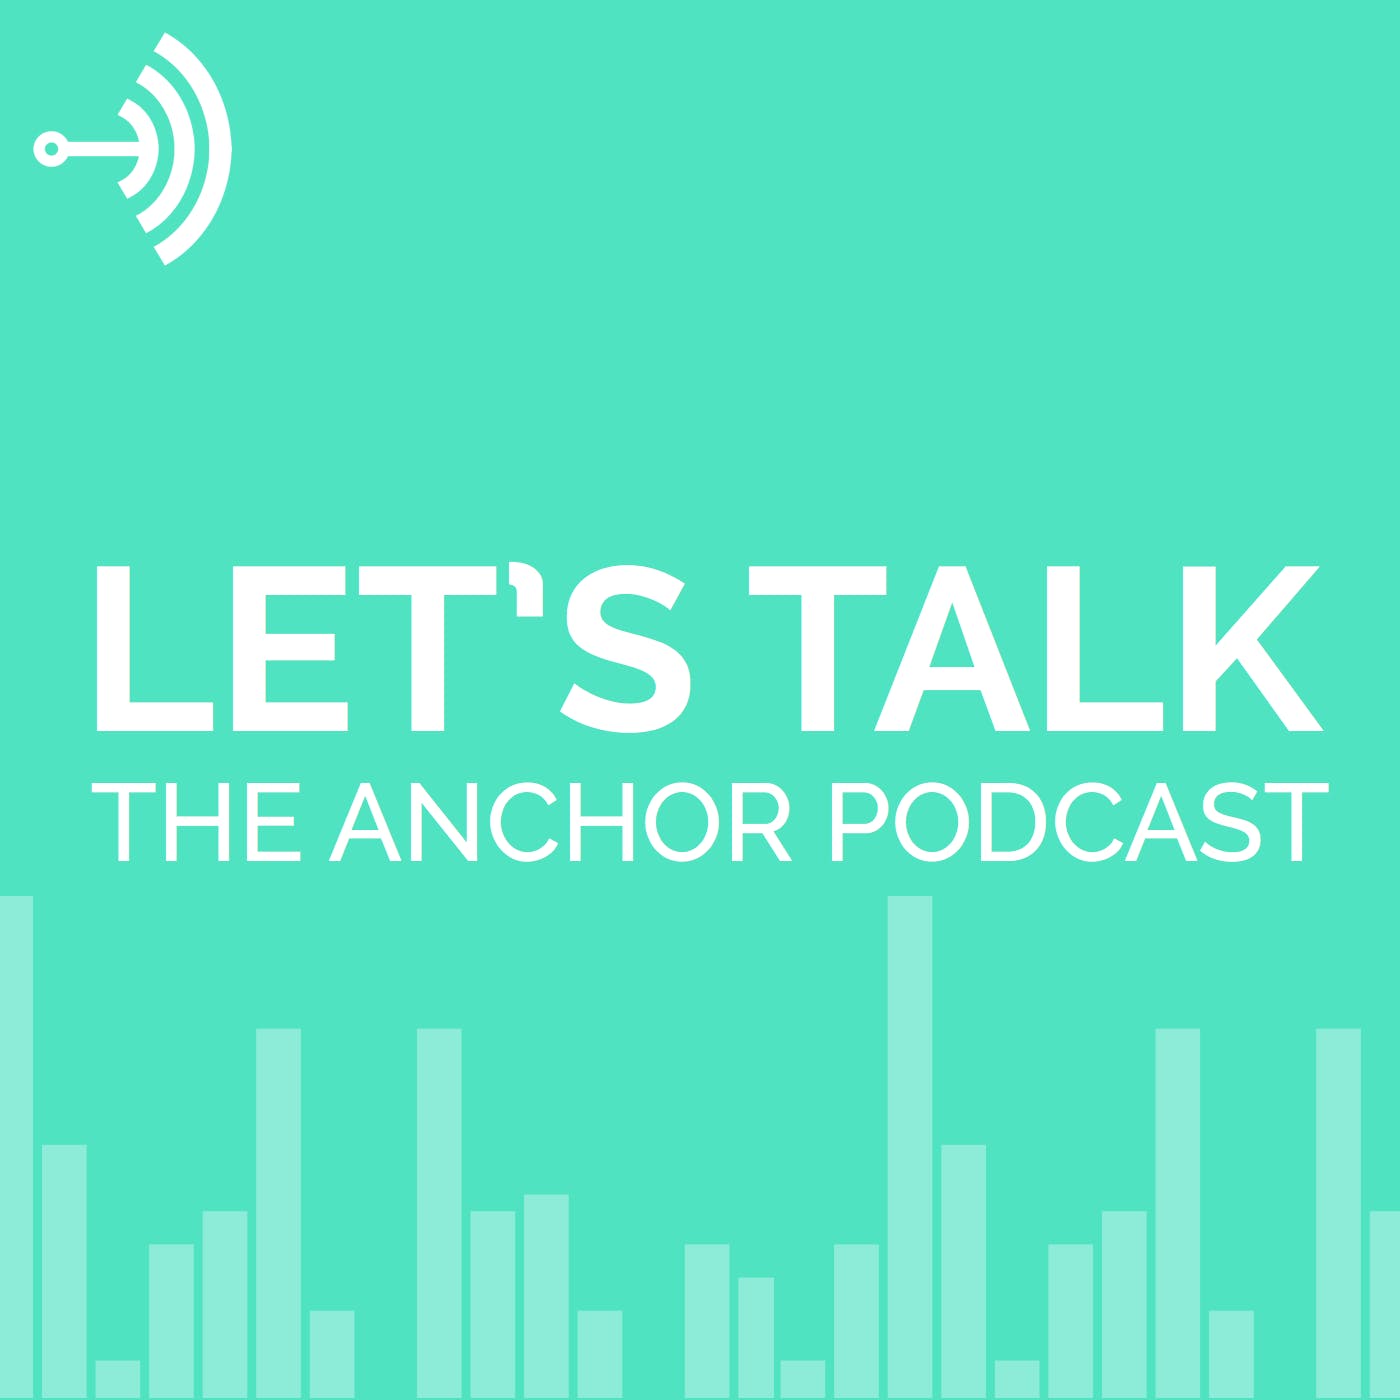 Let's Talk: The Anchor Podcast - Unfavorable Ratings media 2